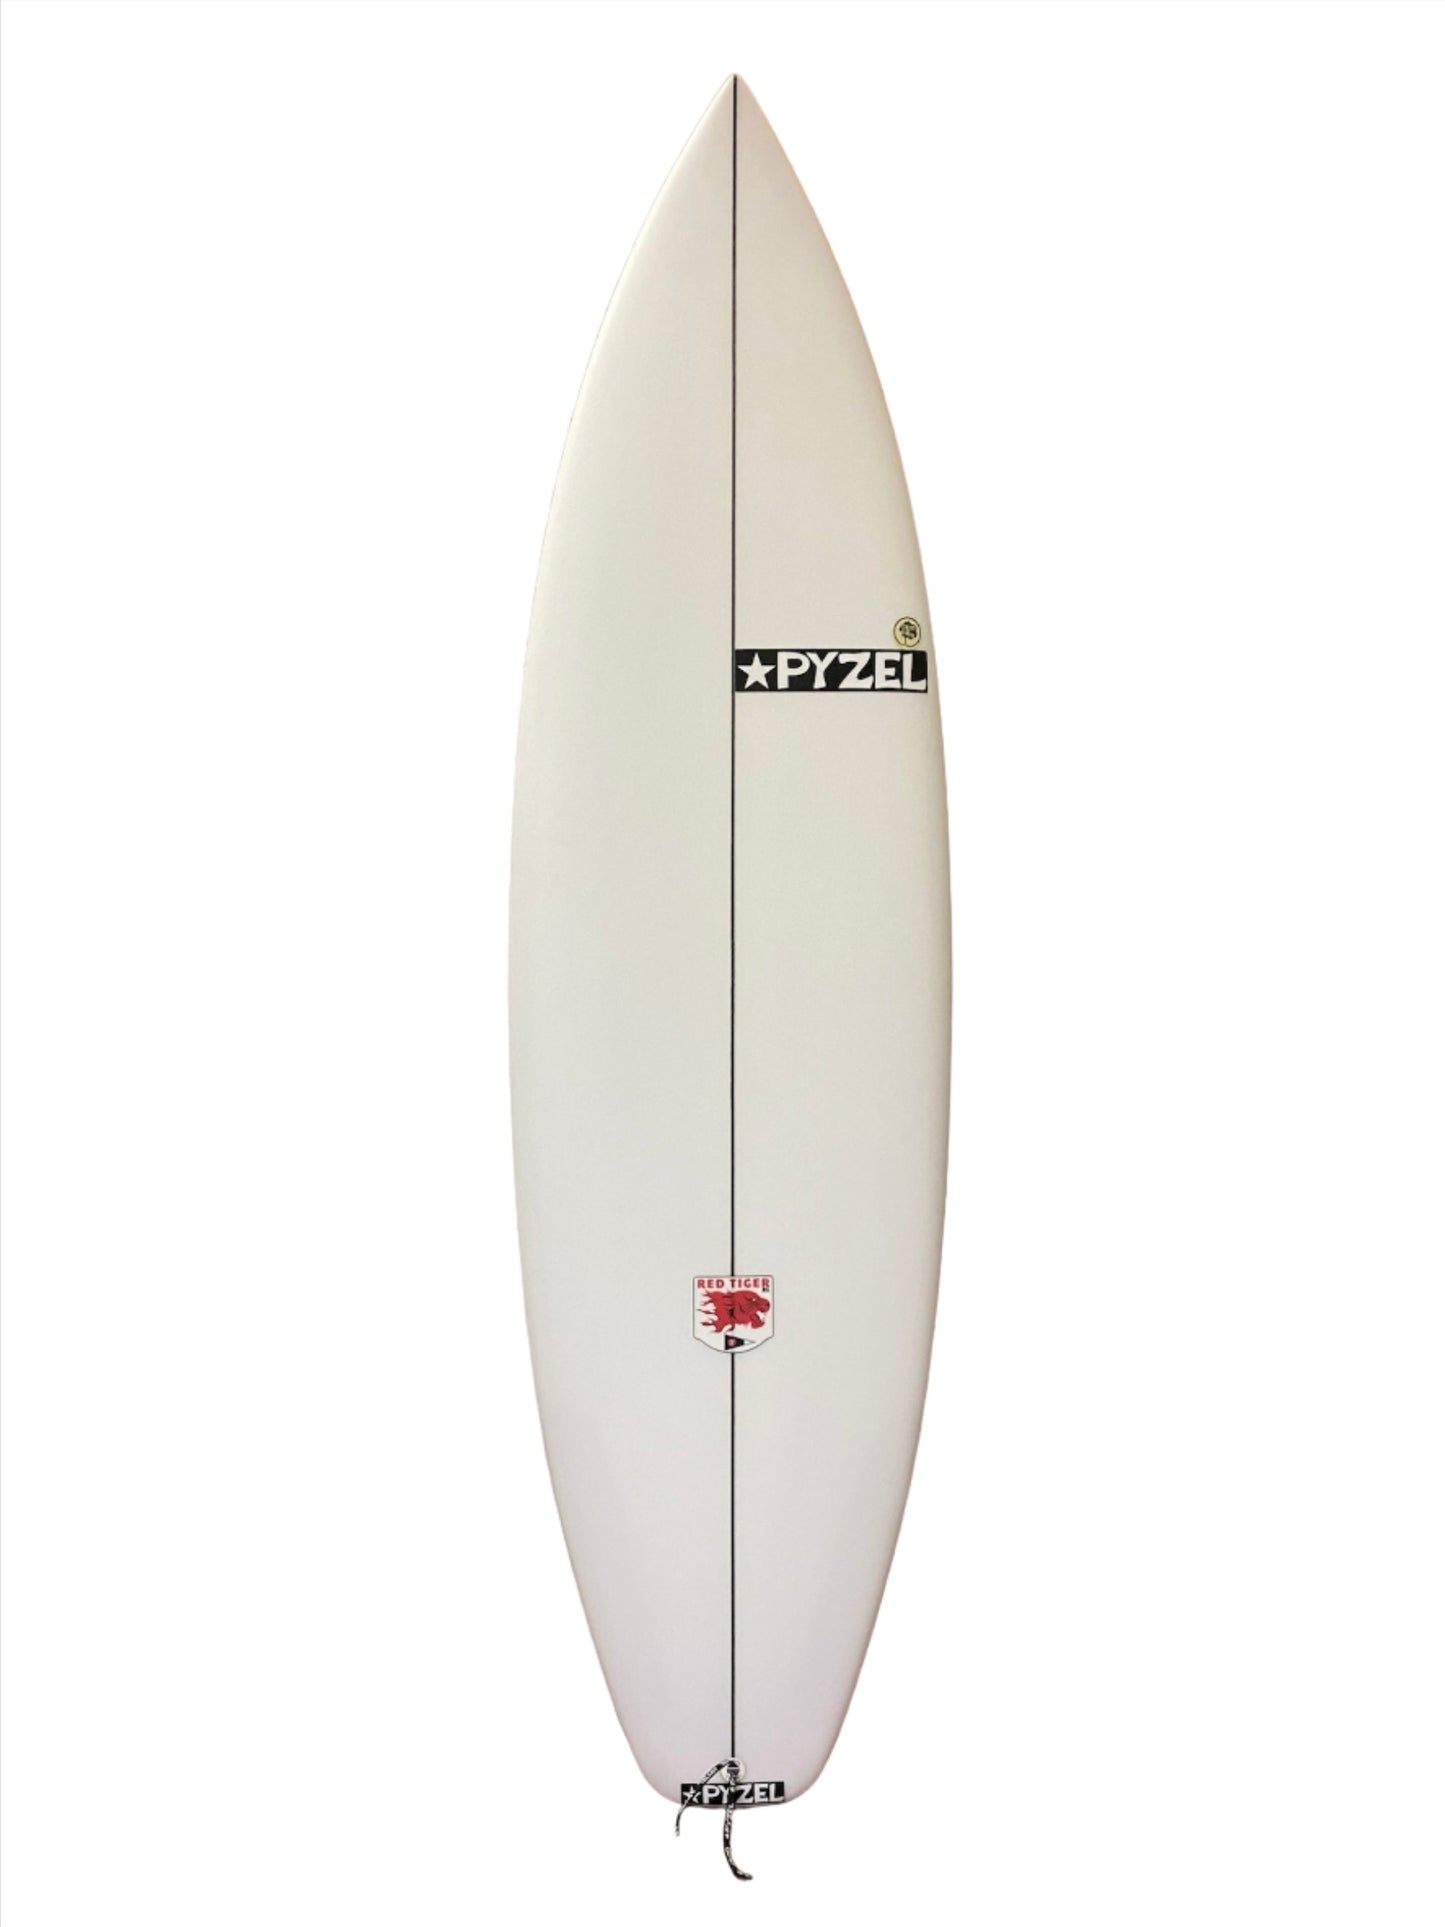 Pyzel Red Tiger XL 6'2" Surfboard